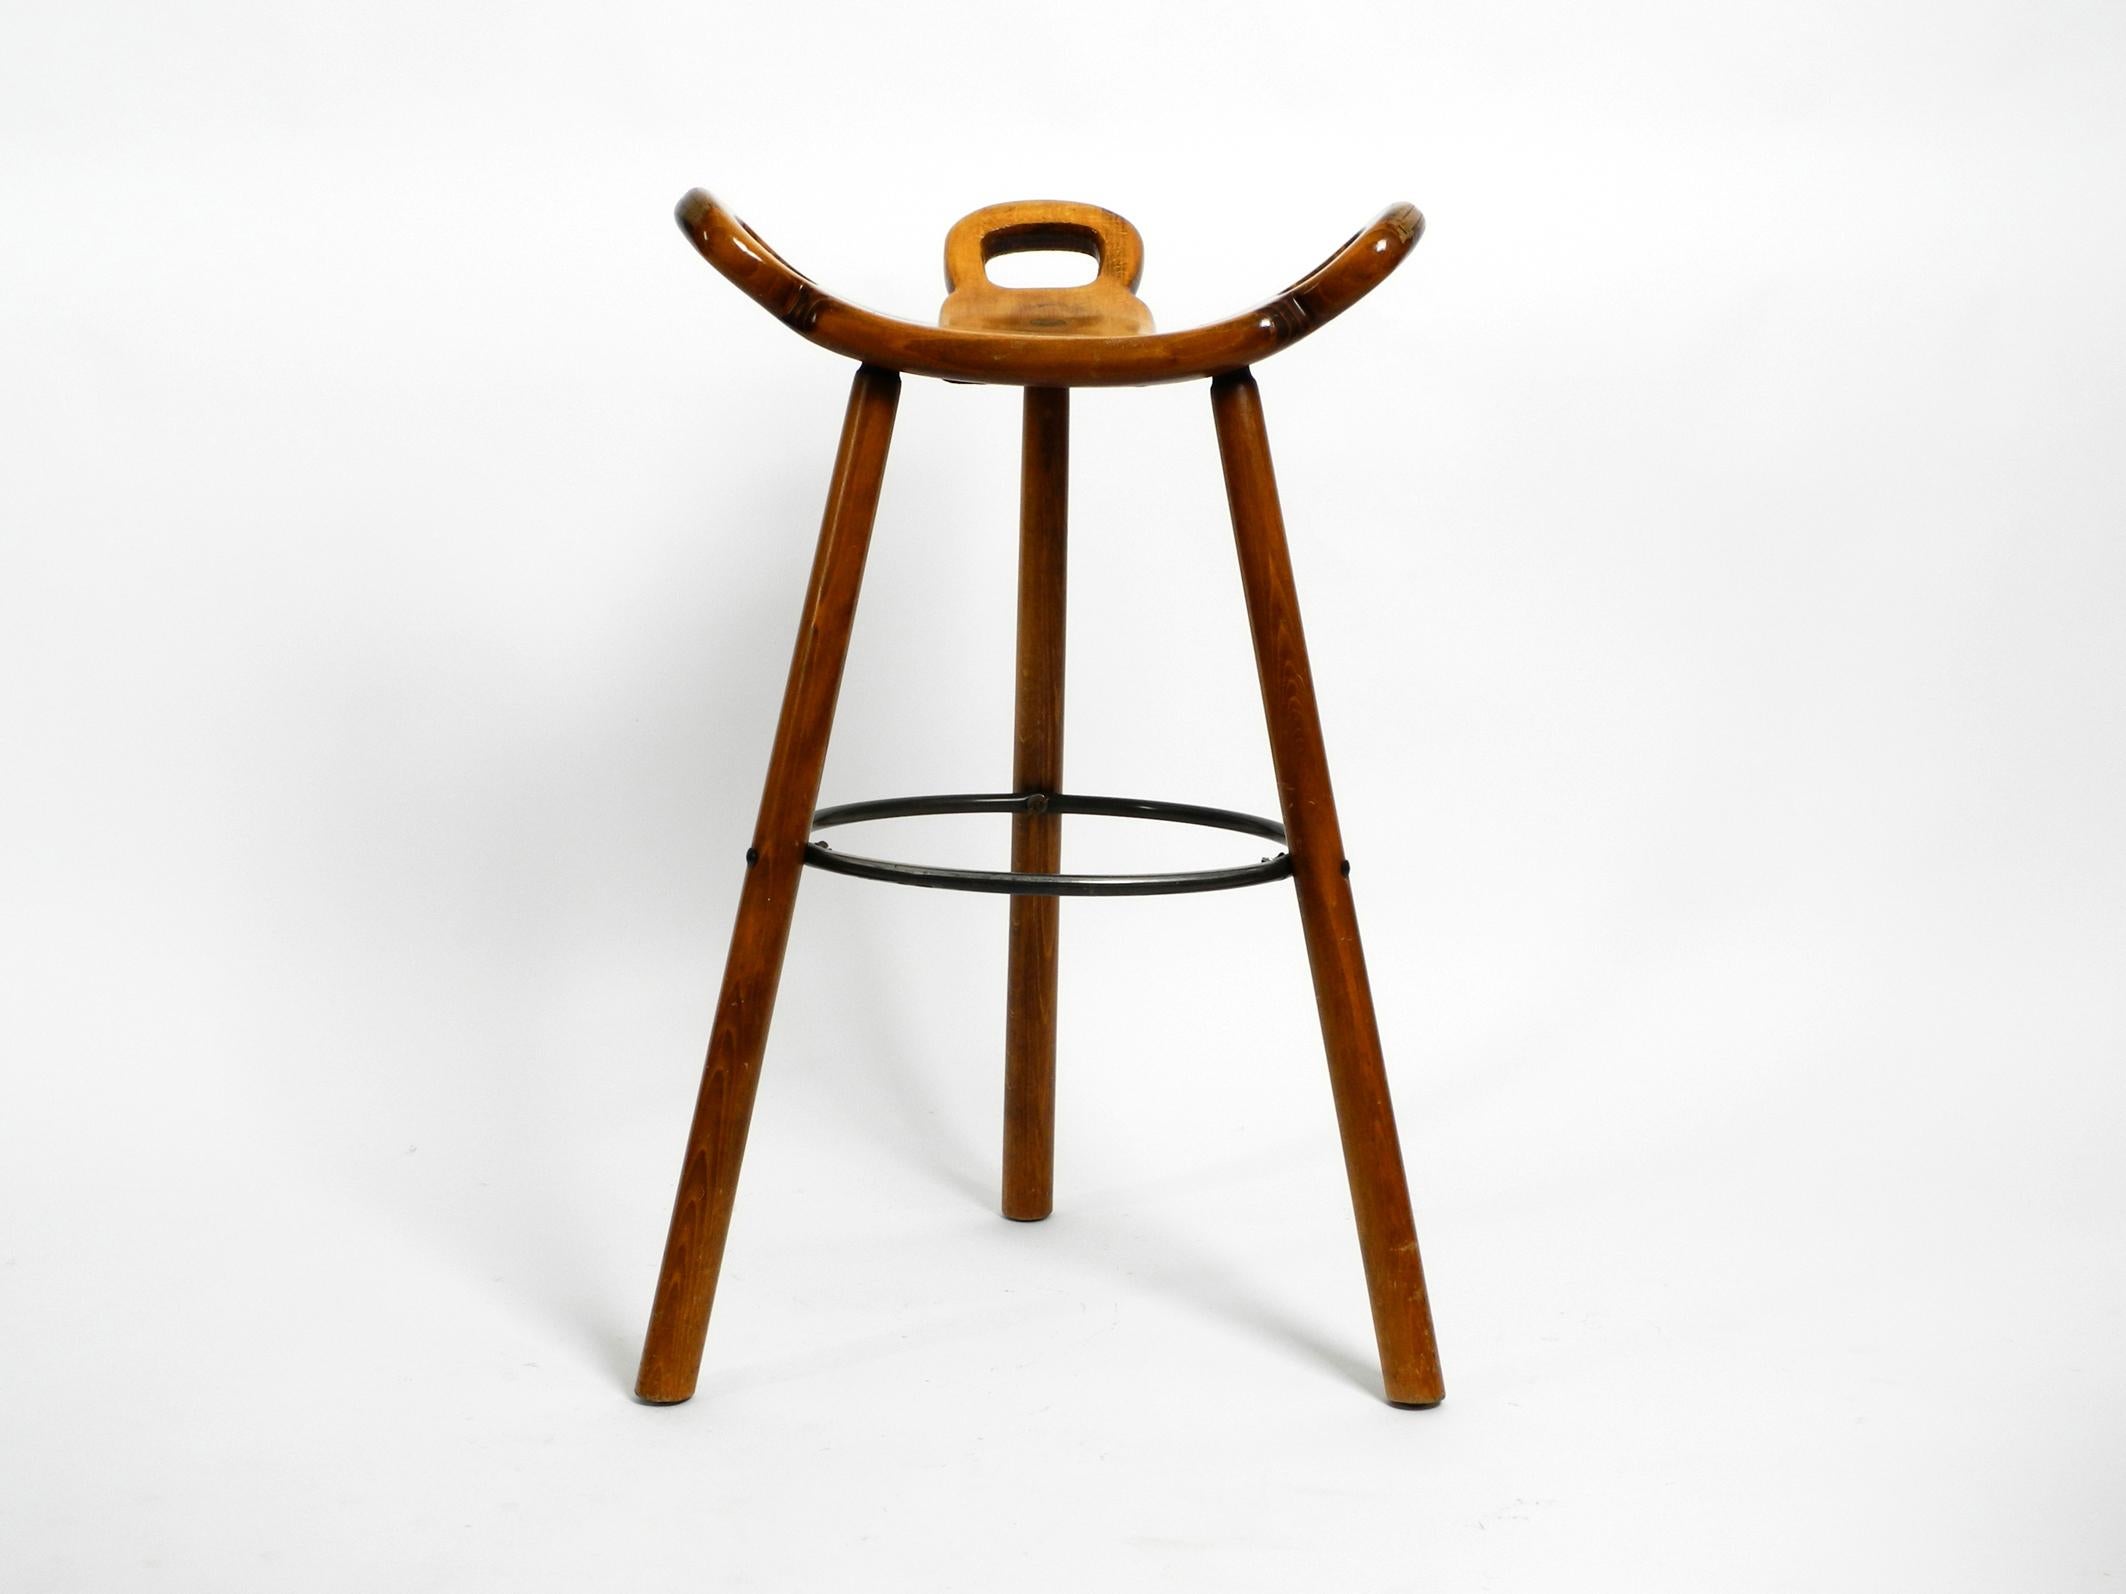 Seventies spanish Marbella bar stool by Sergio Rodrigues for Confonorm.
The design classic among the bar stools.
Beautiful solid three-legged bar stool made of solid wood.
Fantastic condition without damages. Not wobbly, all legs are firm and